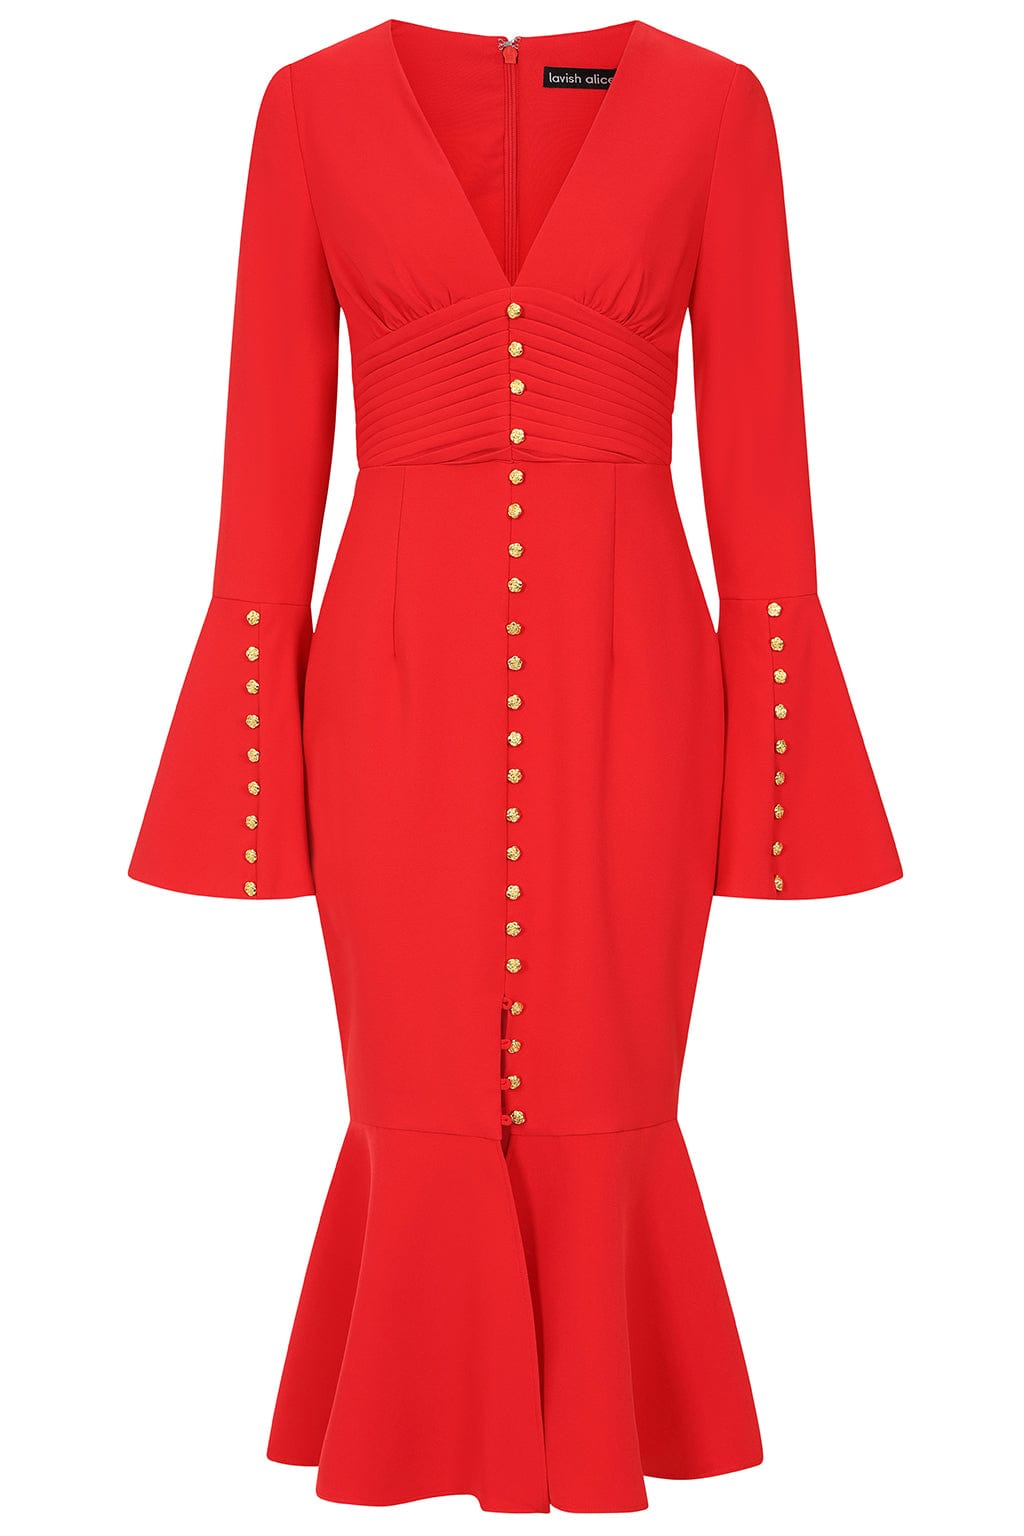 SALMA Fluted Sleeve Rose Button Midi Dress in Red